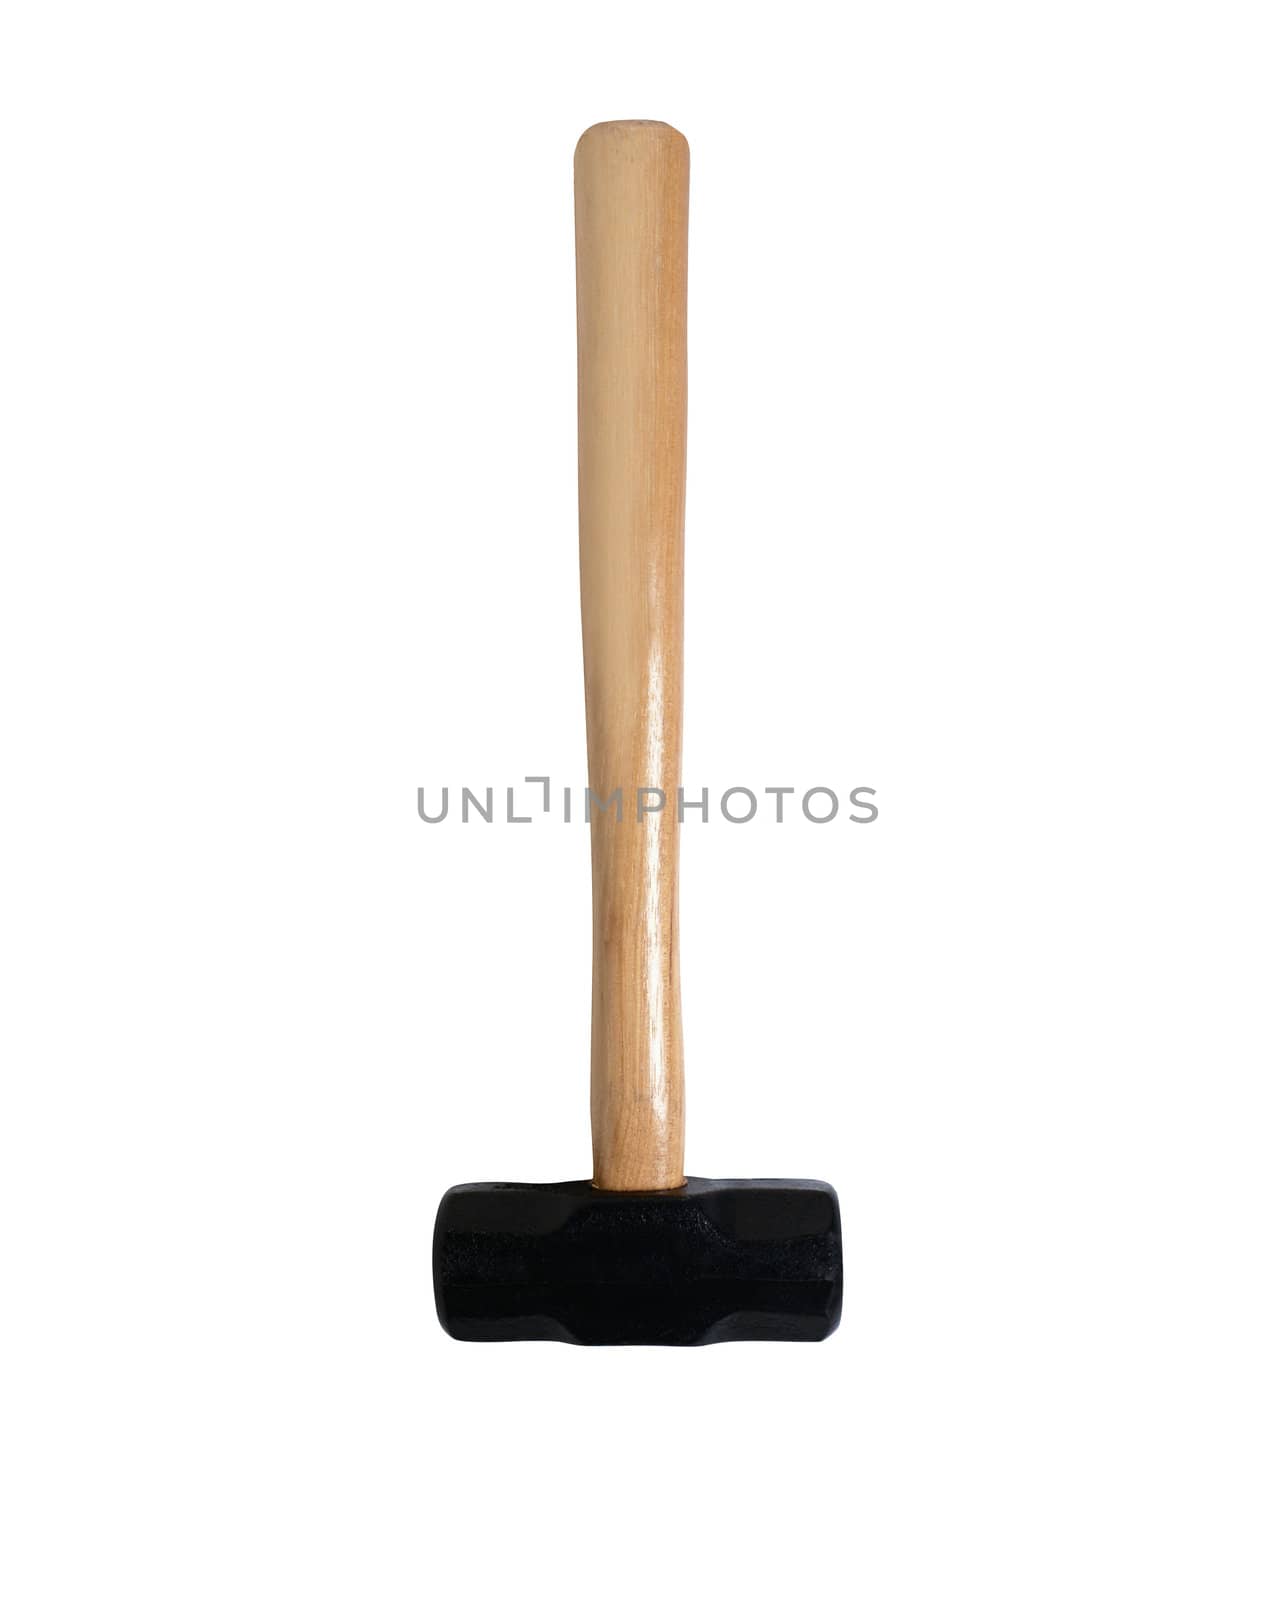 hammer against a white background